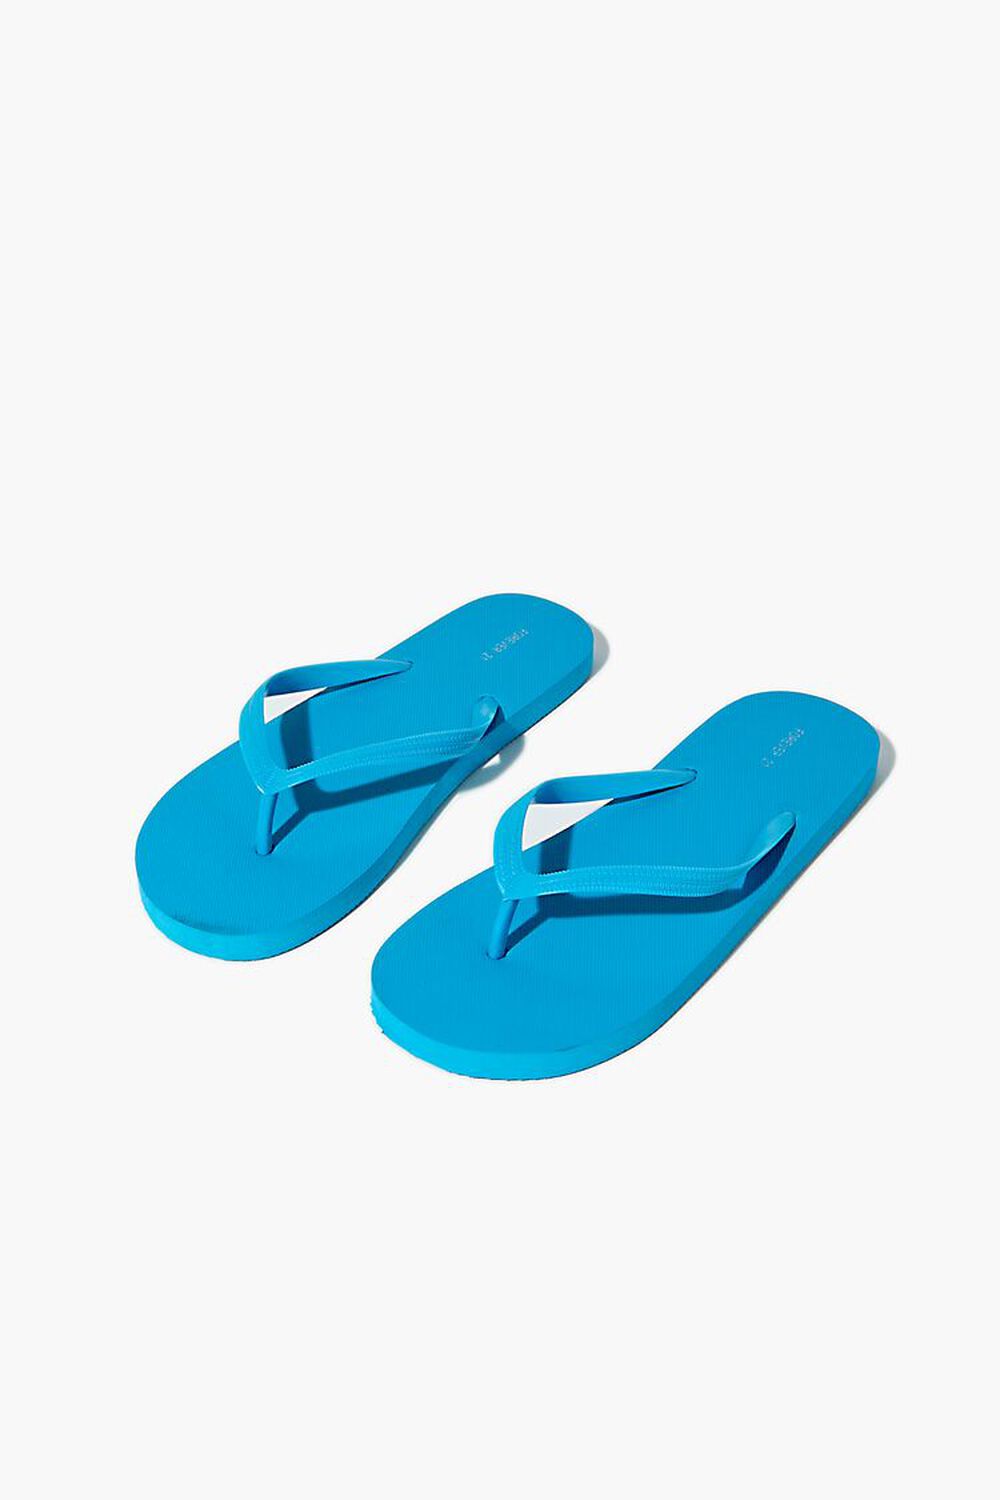 Mammoth in terms of Forge Classic Foam Flip-Flops